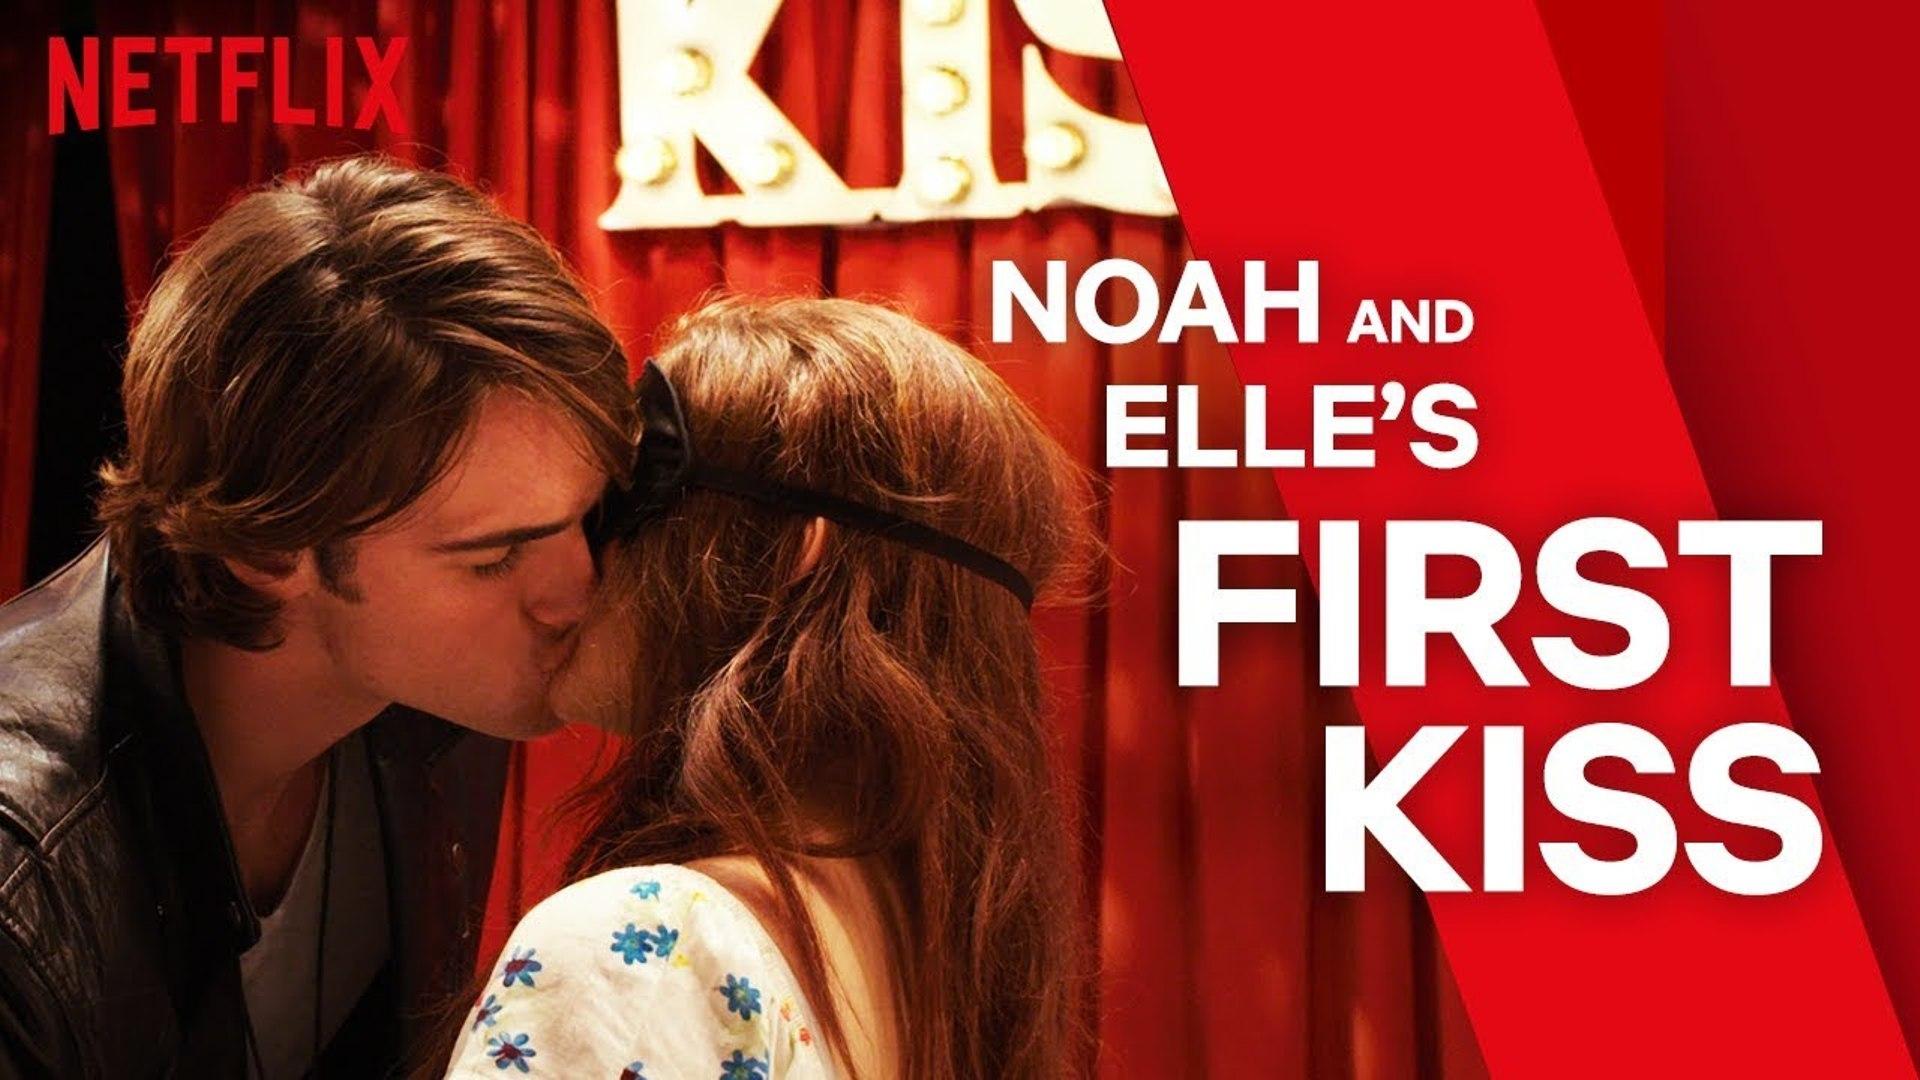 The Kissing Booth Movie Clip and Elle's First Kiss 2018